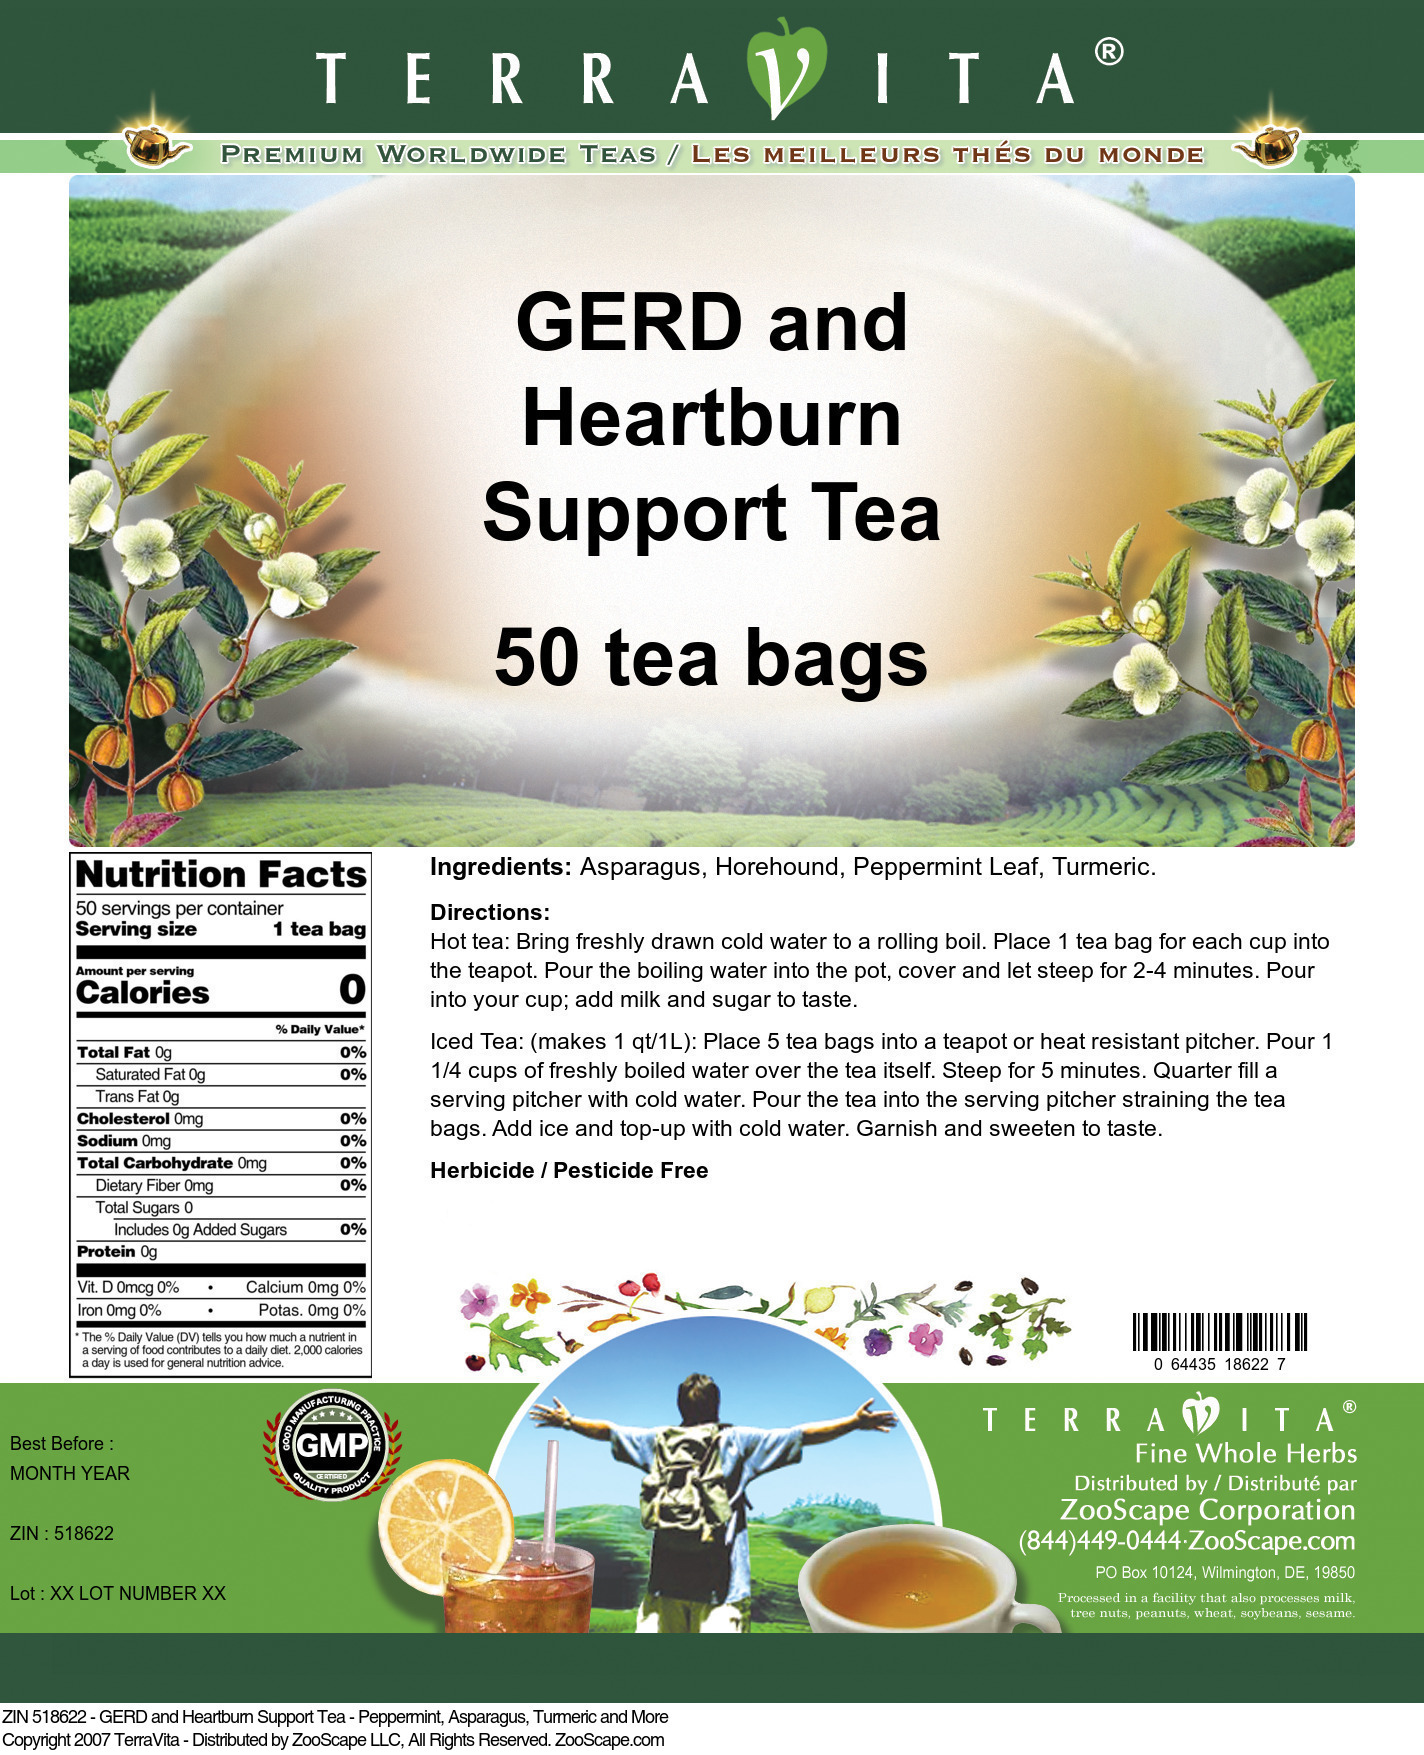 GERD and Heartburn Support Tea - Peppermint, Asparagus, Turmeric and More - Label